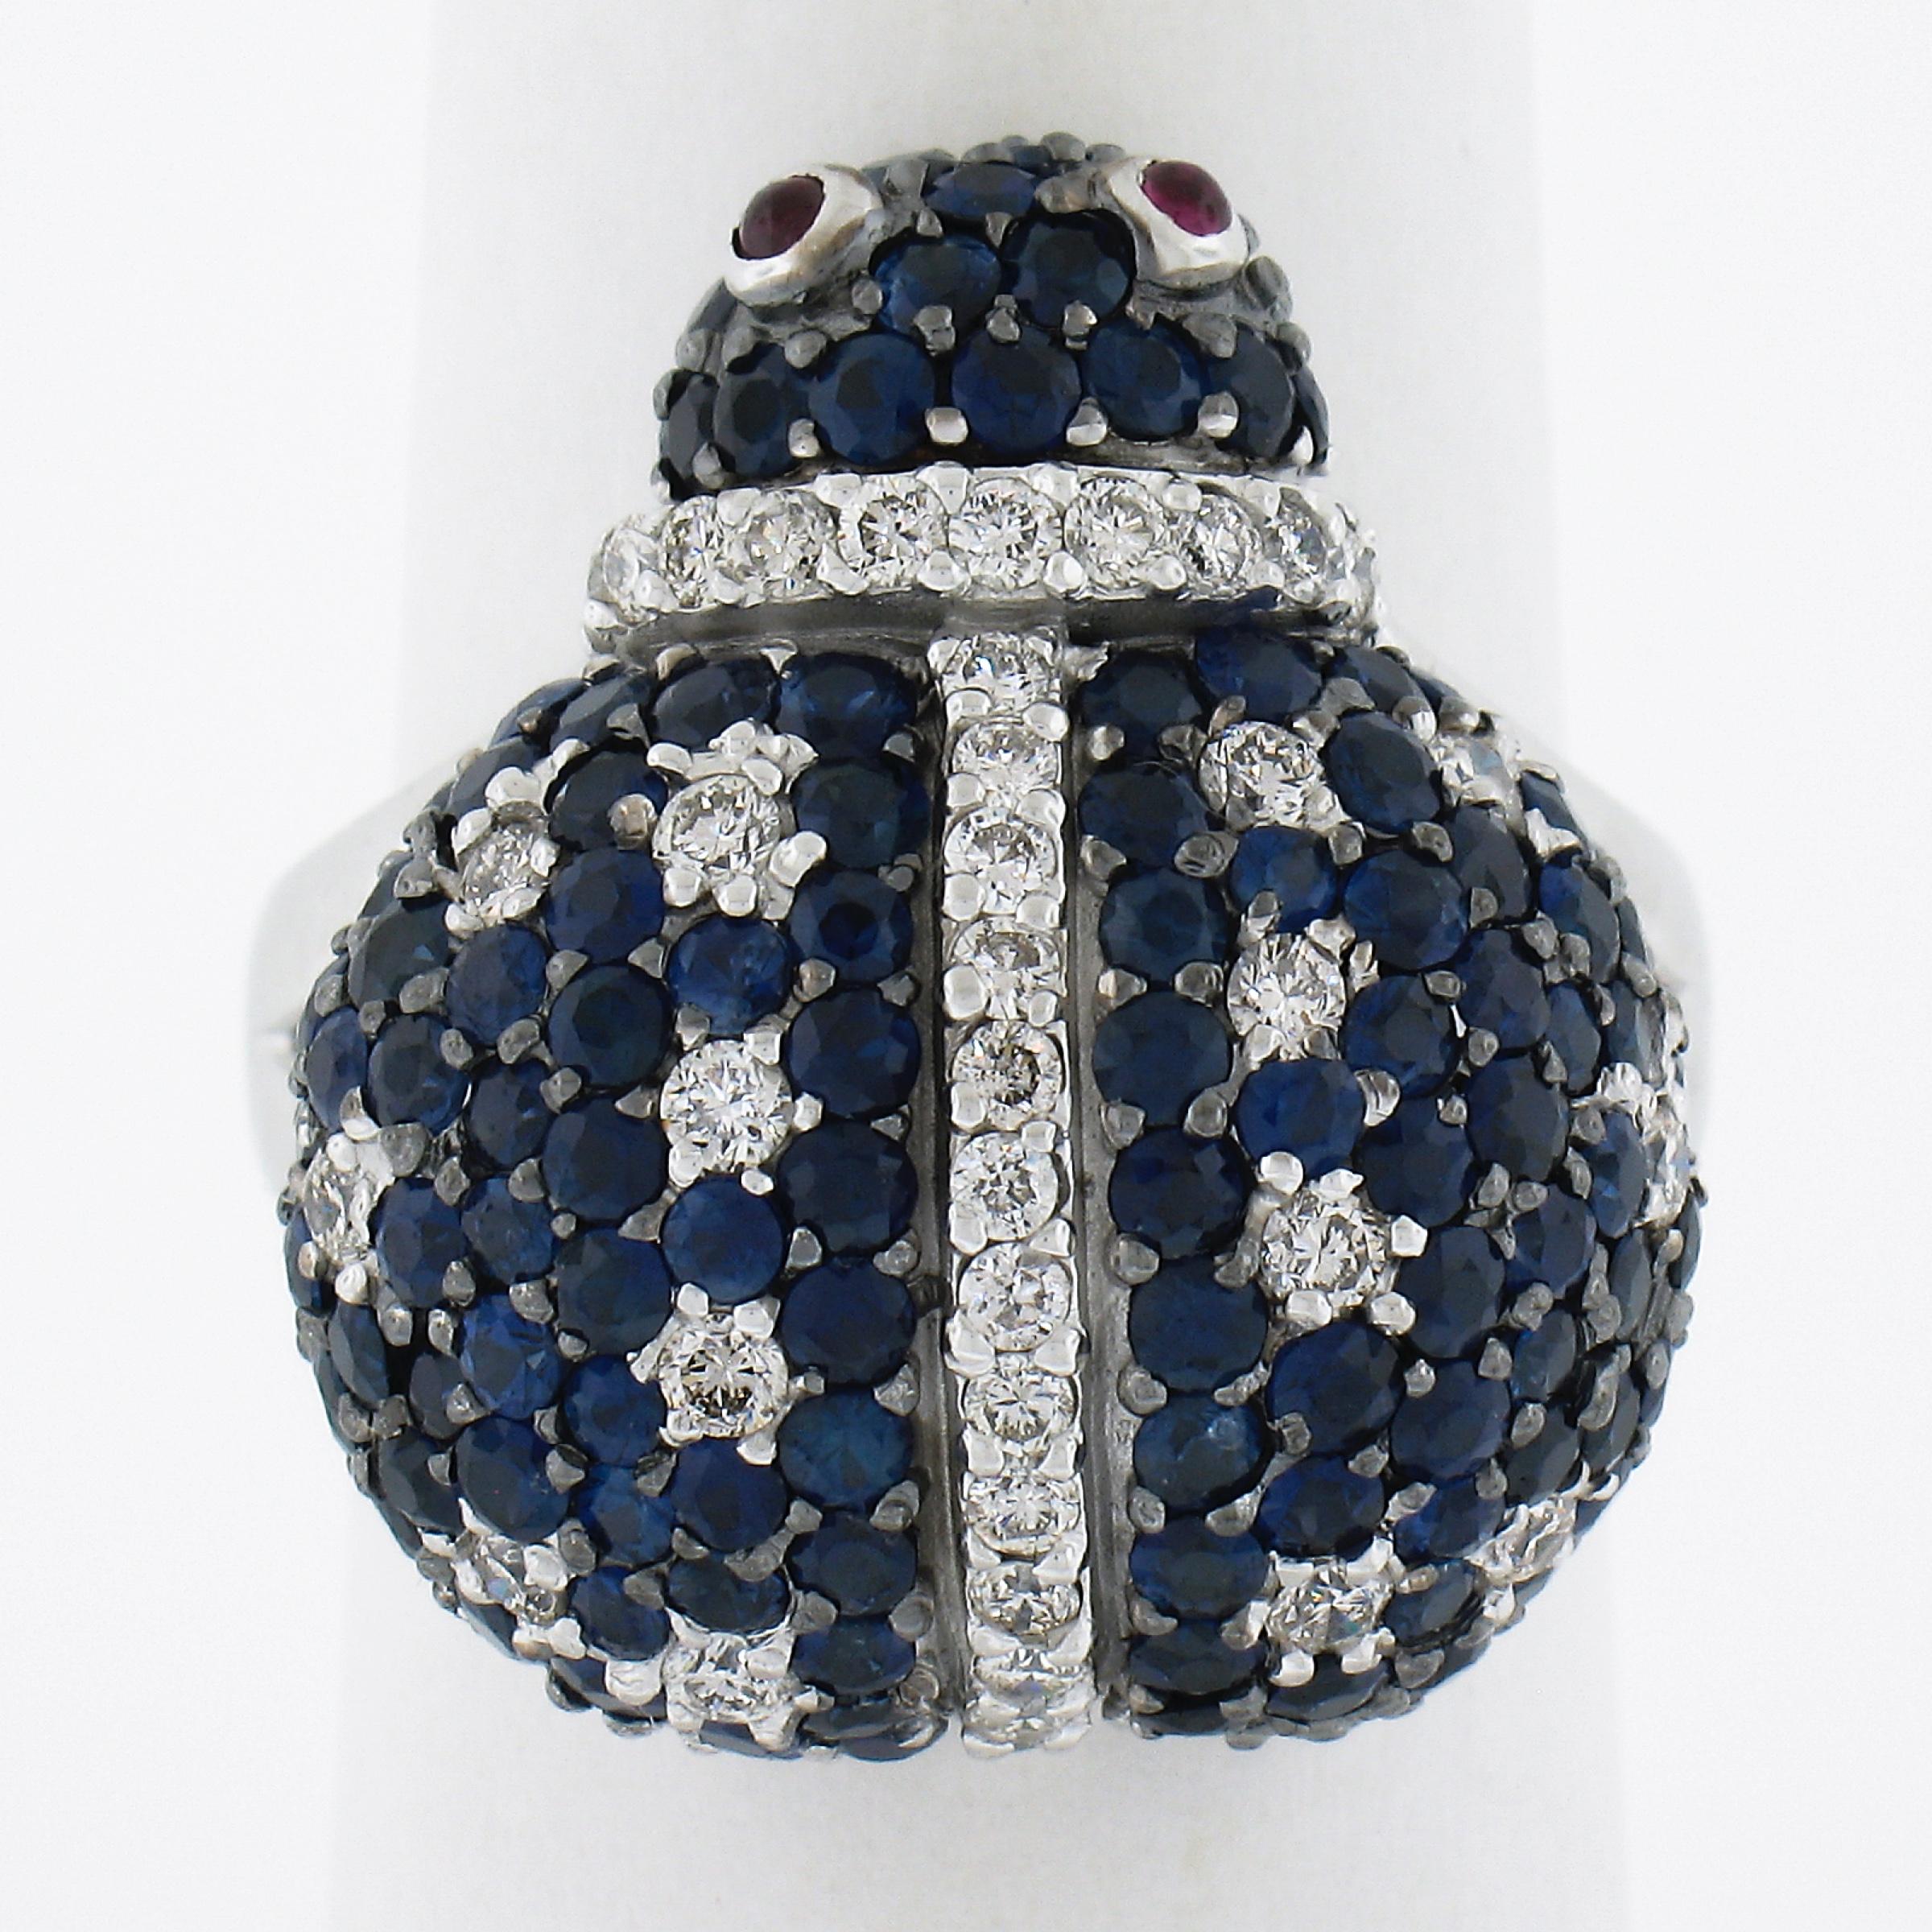 This wonderful whimsical ring creates a puffed lady bug look with very nice blue full cut round sapphires and diamonds - super quality. Enjoy!

--Stone(s):--
(38) Natural Genuine Diamonds - Round Brilliant Cut - Prong Set -  VS1-SI1 Clarity -